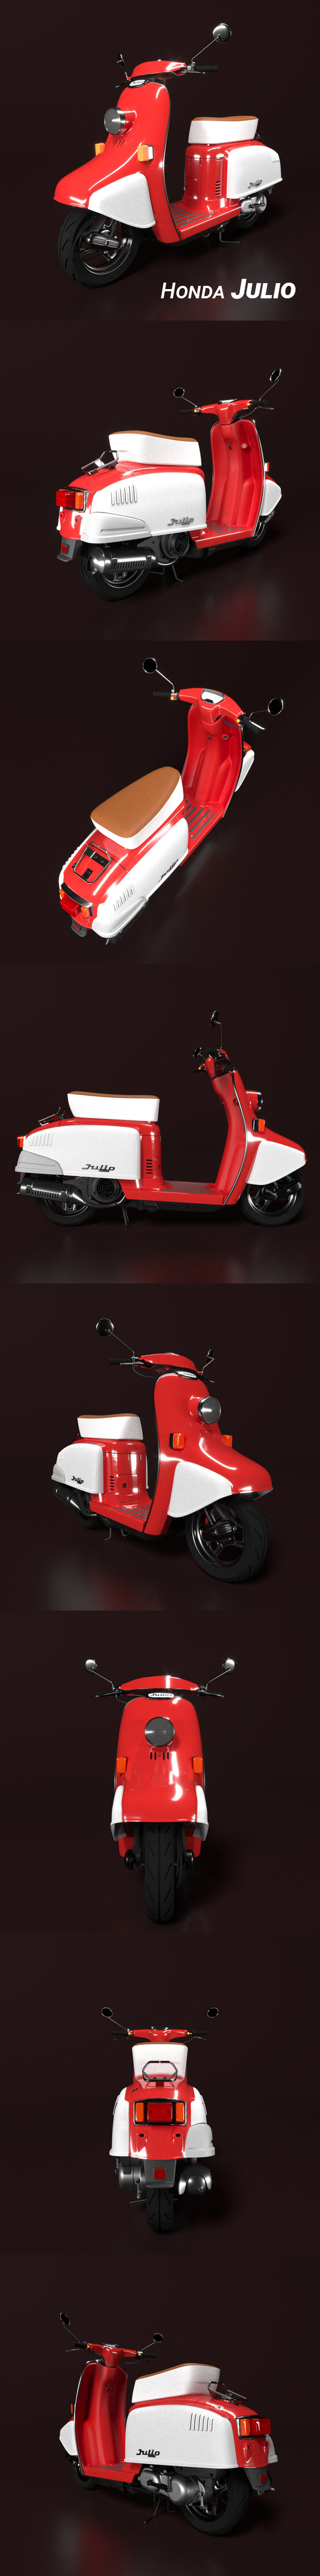 Scooters Honda Julio Scooter